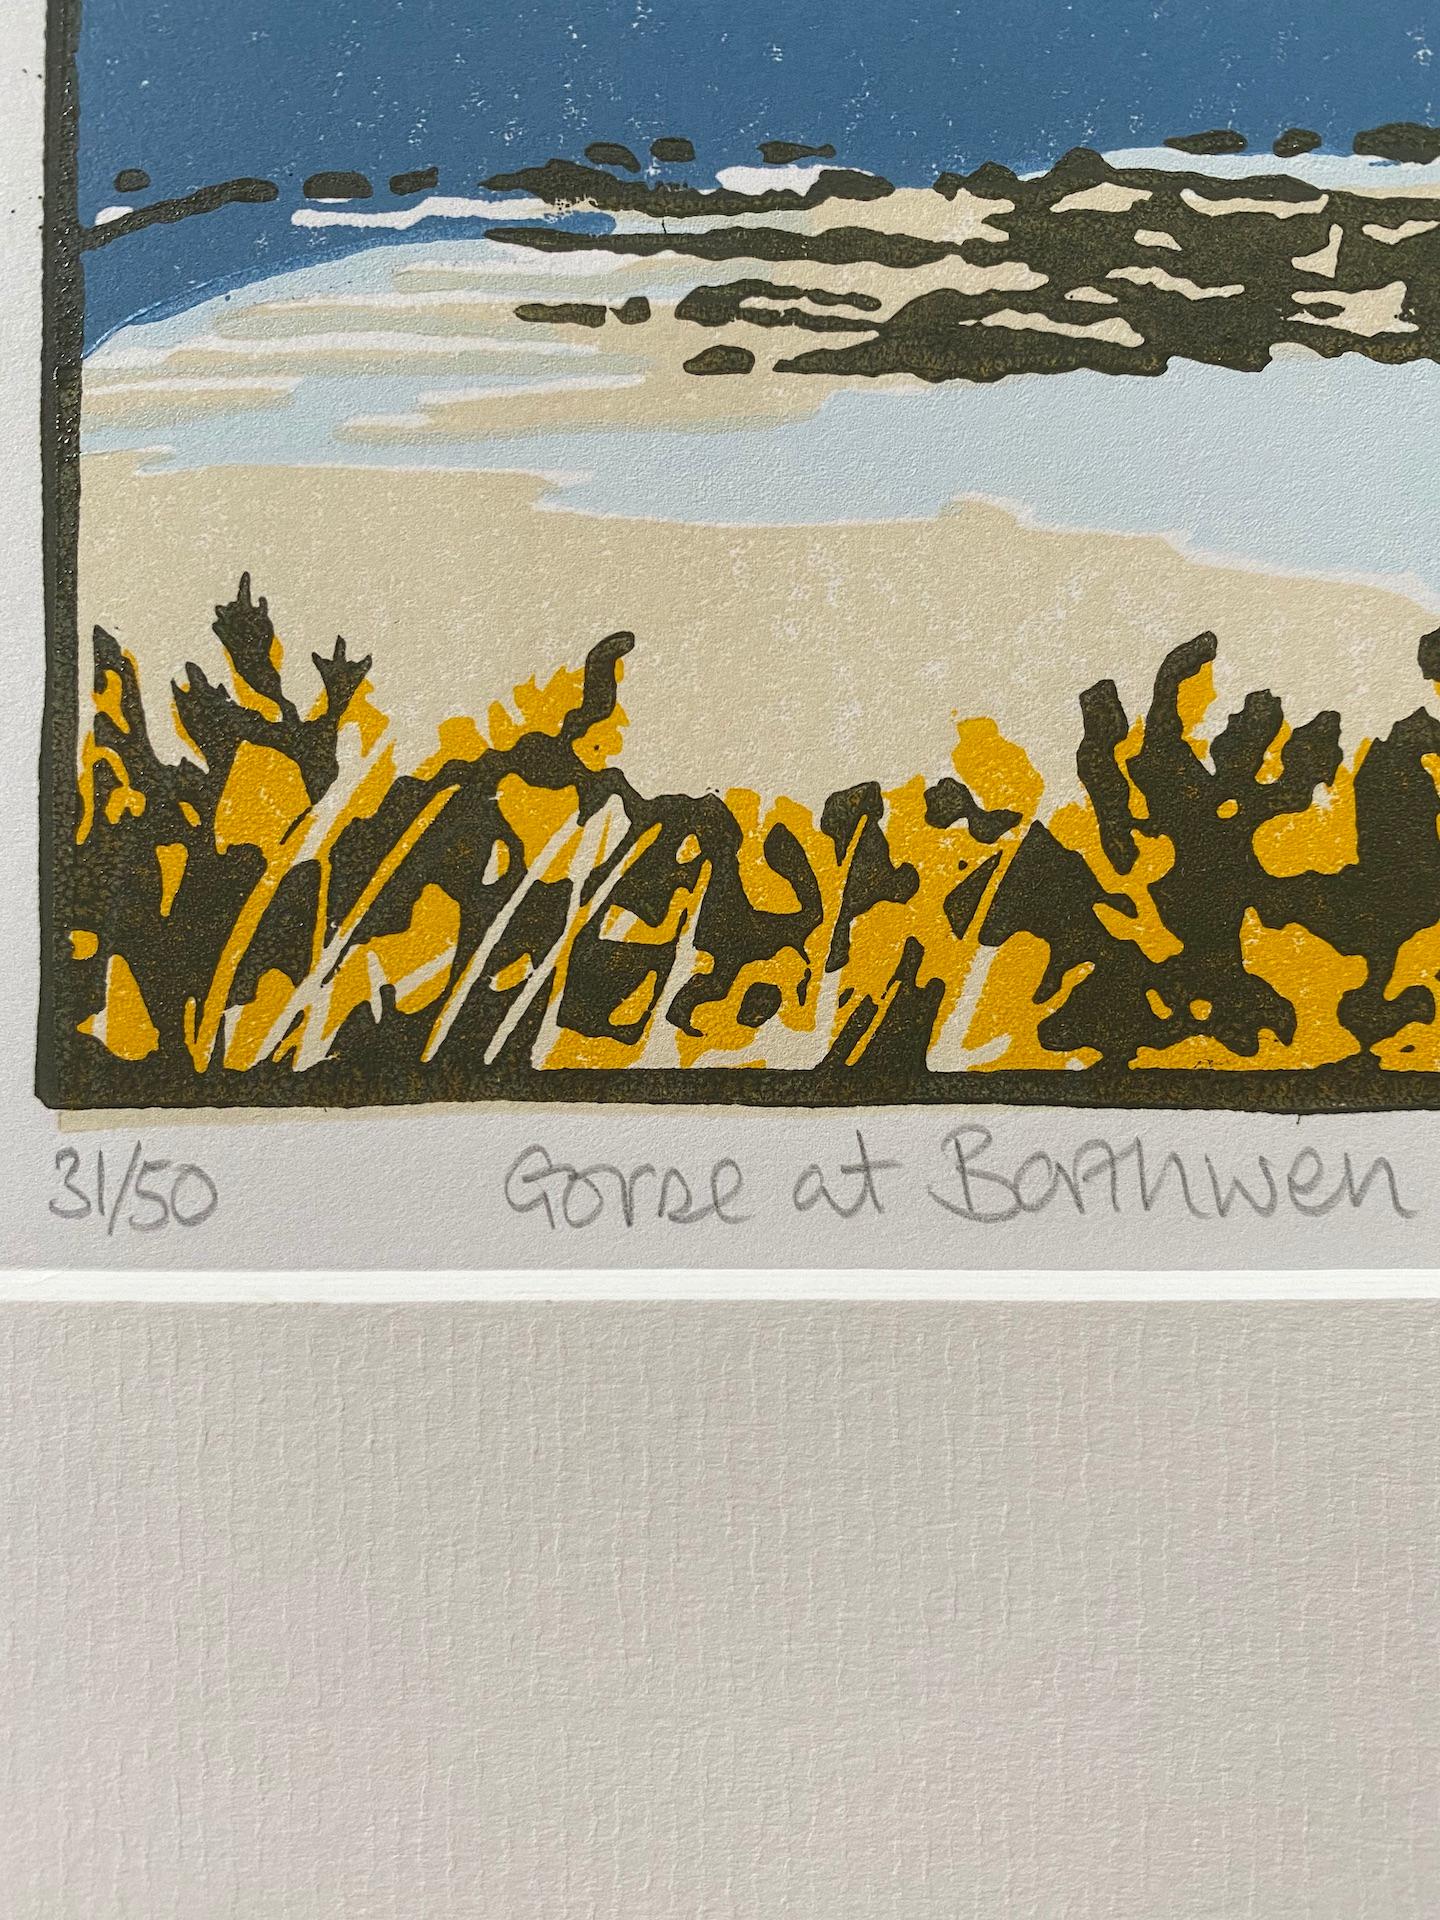 Fiona Carver
Gorse at Borthwen
Limited Edition Linocut Print
Edition of 50
Image size: 13.5 x 13.5cm
Mounted size: 27 x 27cm (approx)
Sold Unframed, mounted in pale cream
Free Shipping
Please note that in situ images are purely an indication of how